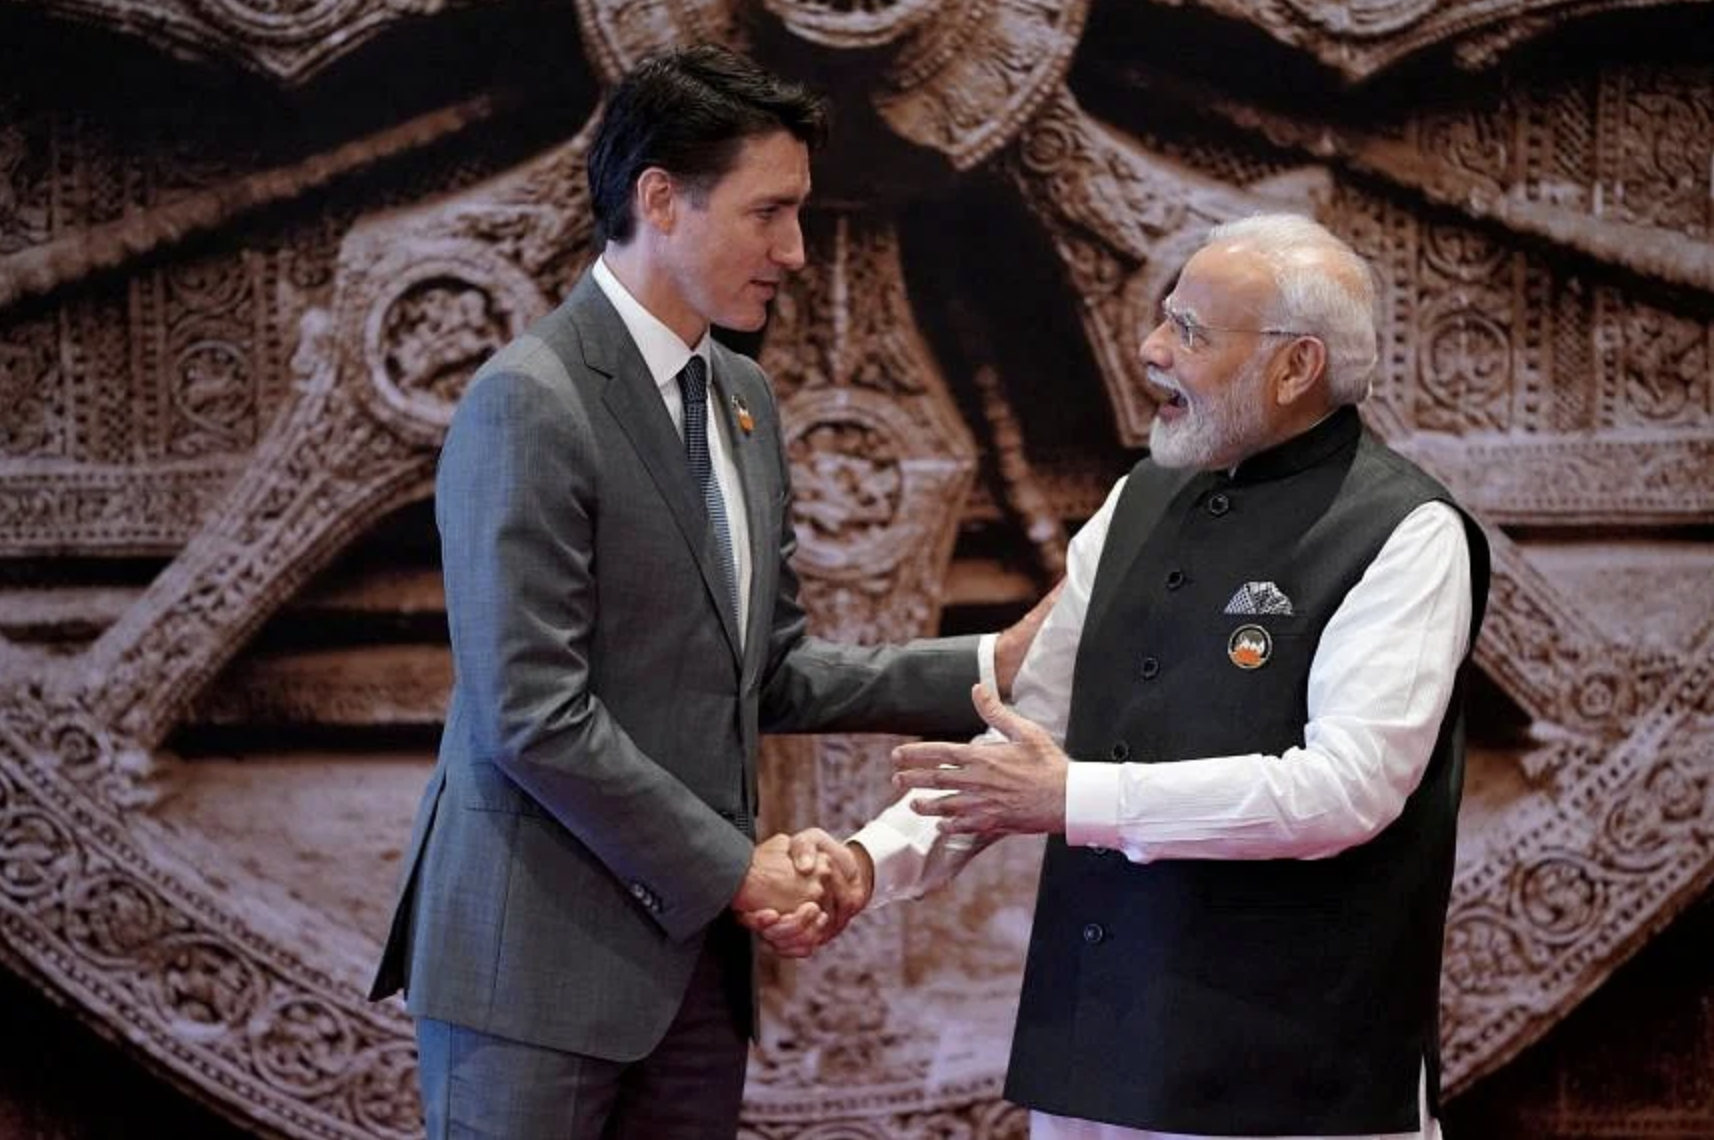 Canadian Prime Minister Justin Trudeau stranded in India - photo 1.